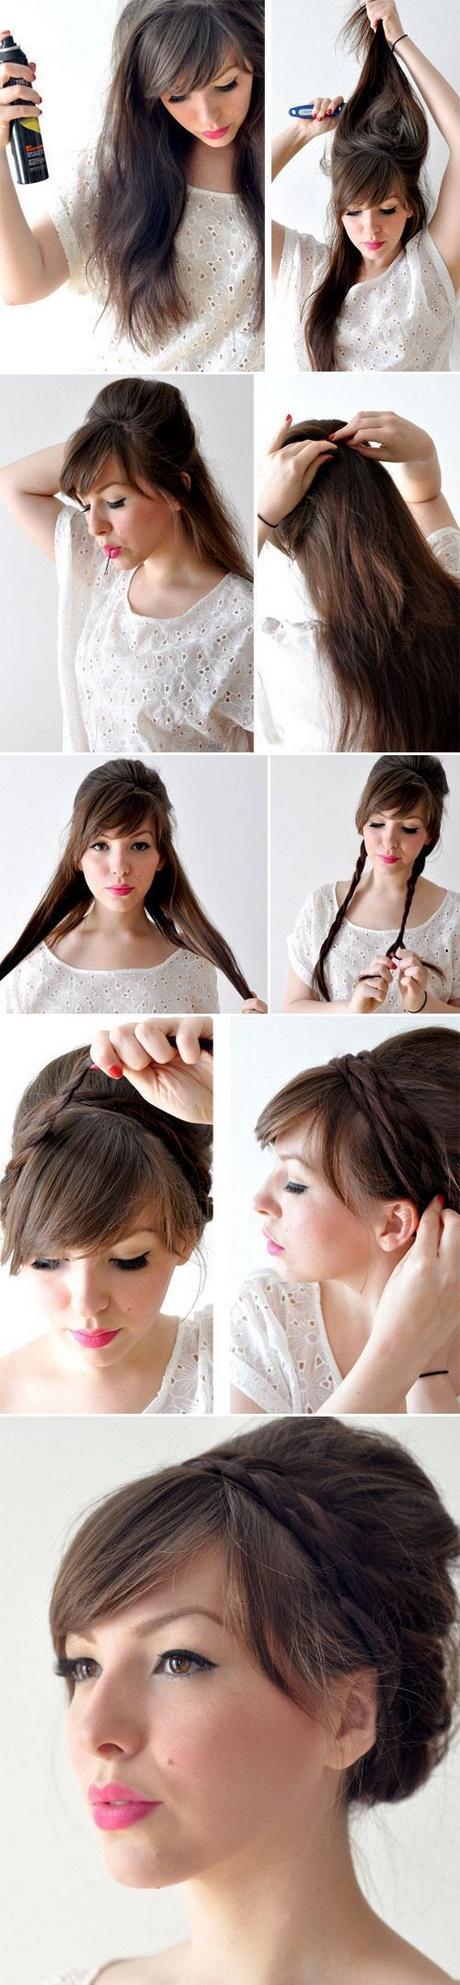 Cute hairstyles to do at home cute-hairstyles-to-do-at-home-30_5